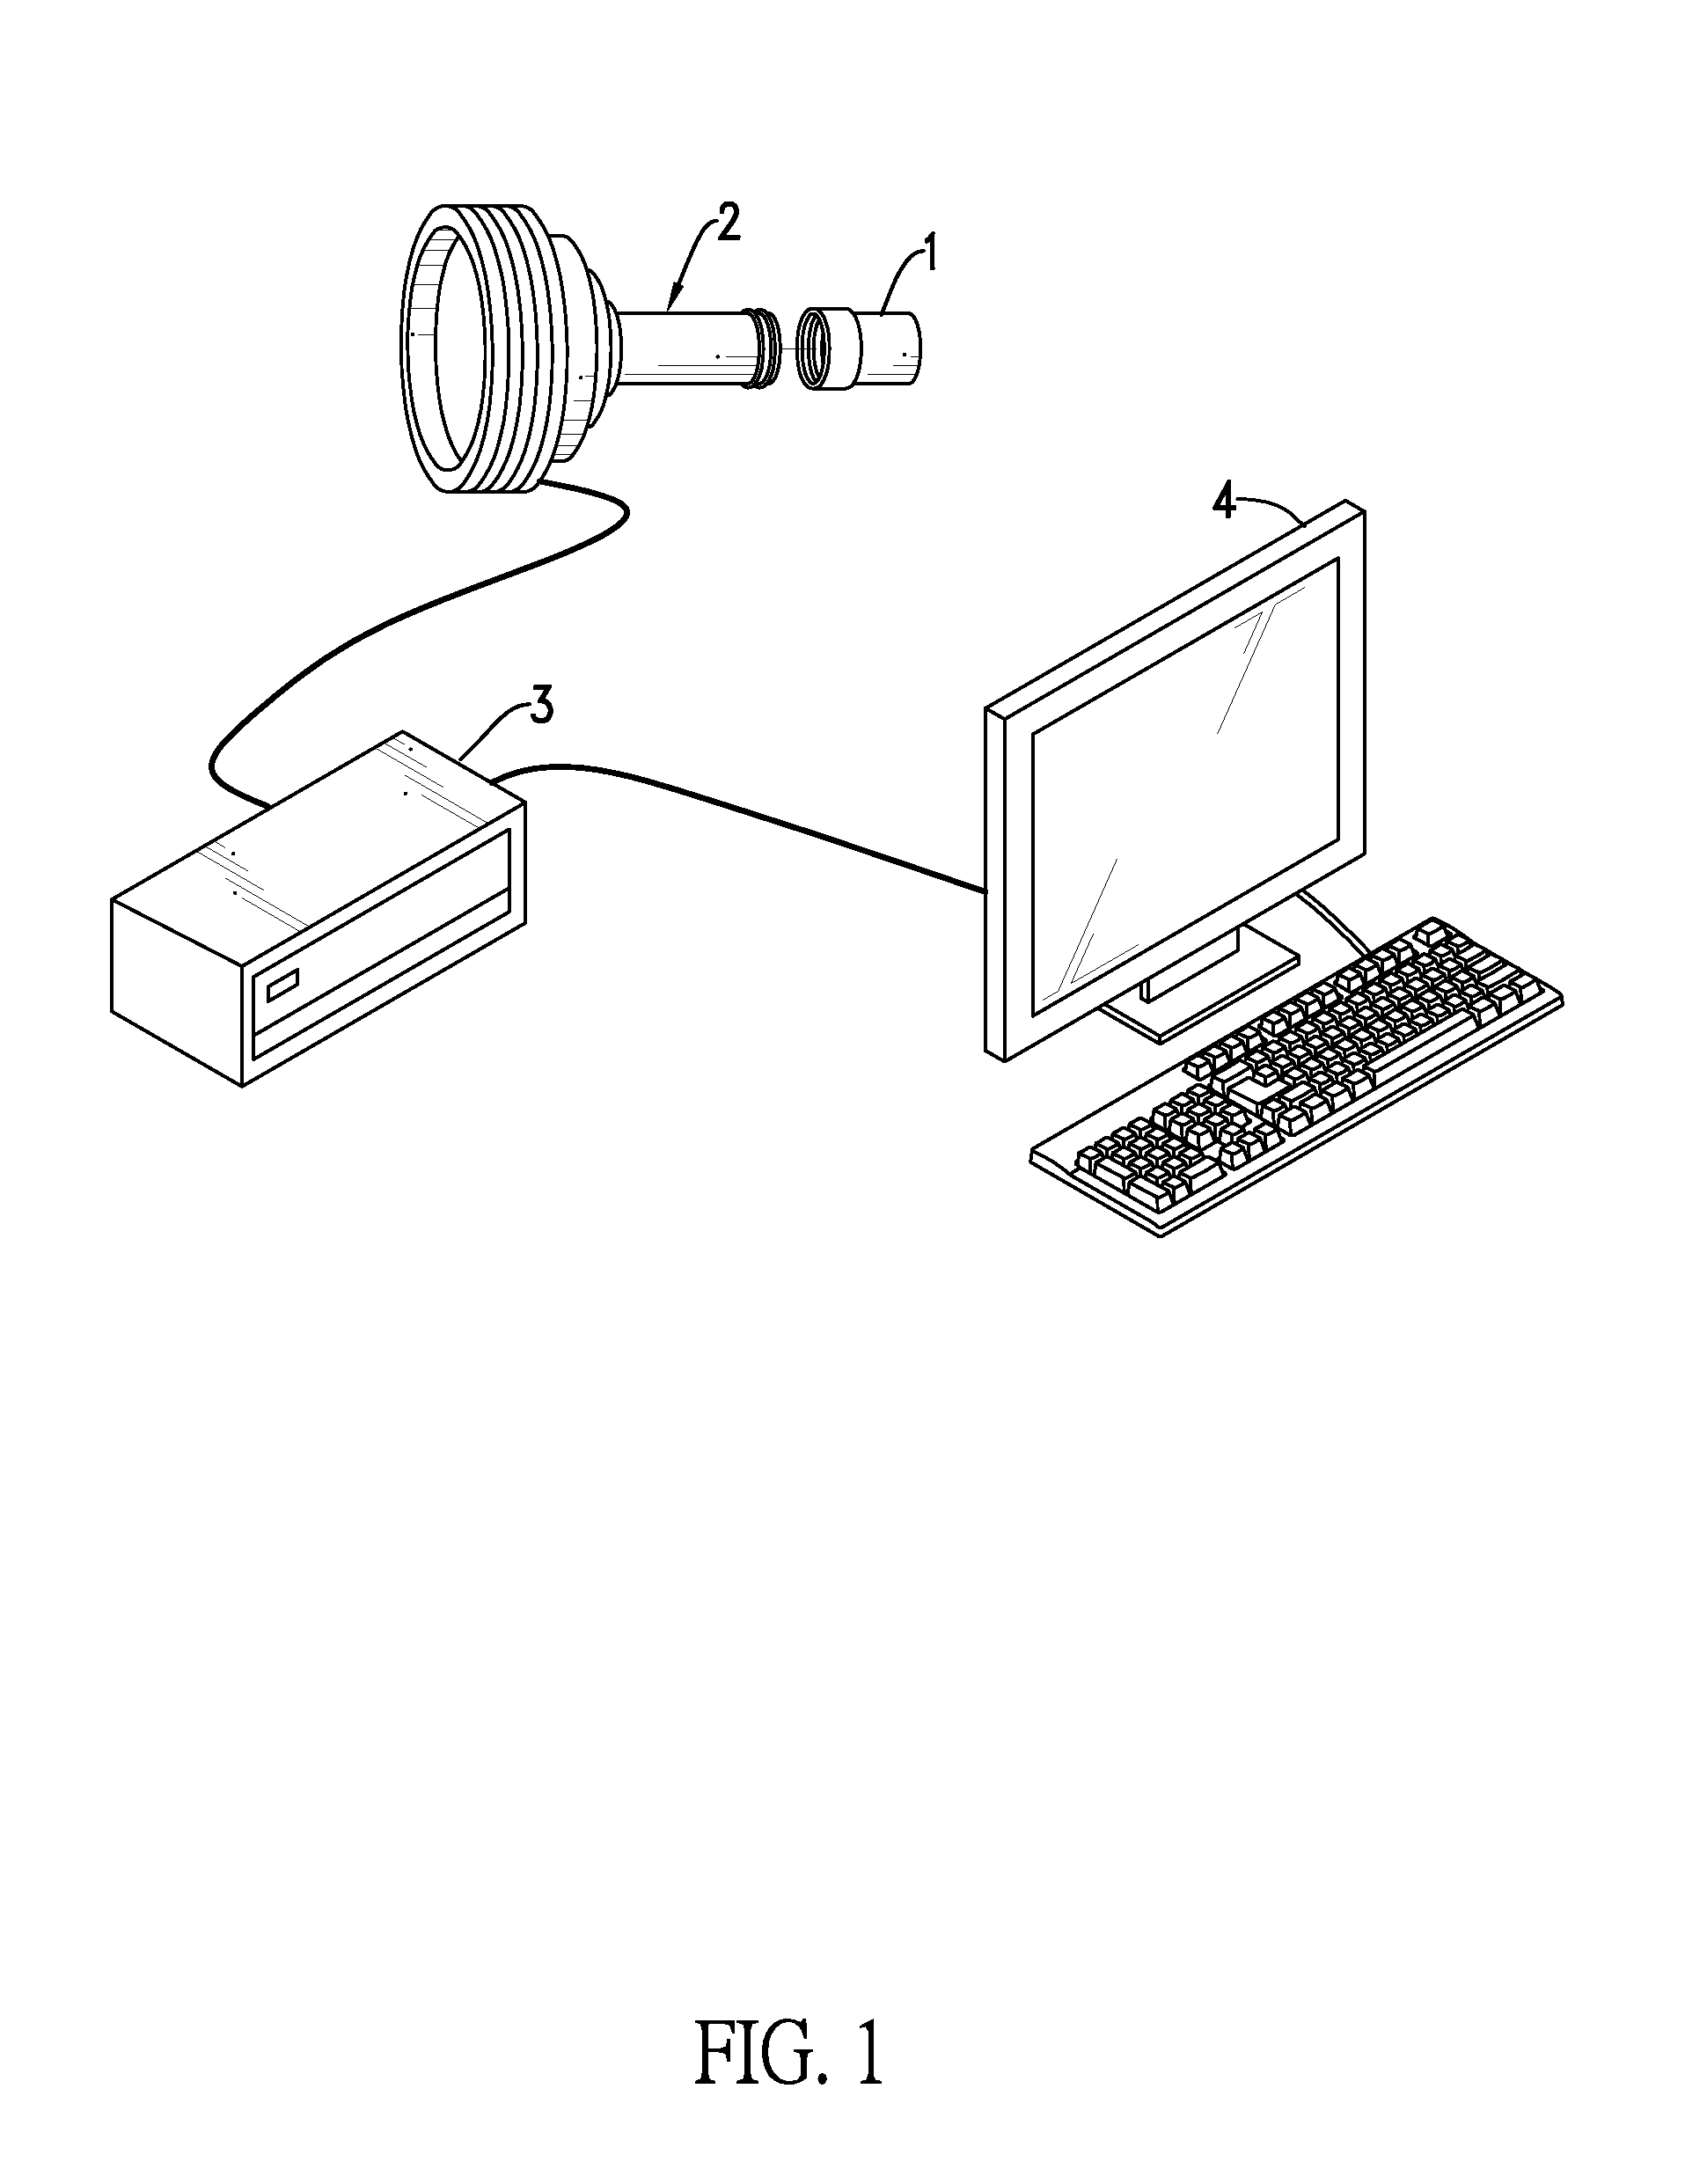 Stereoscopic vision system generatng stereoscopic images with a monoscopic endoscope and an external adapter lens and method using the same to generate stereoscopic images